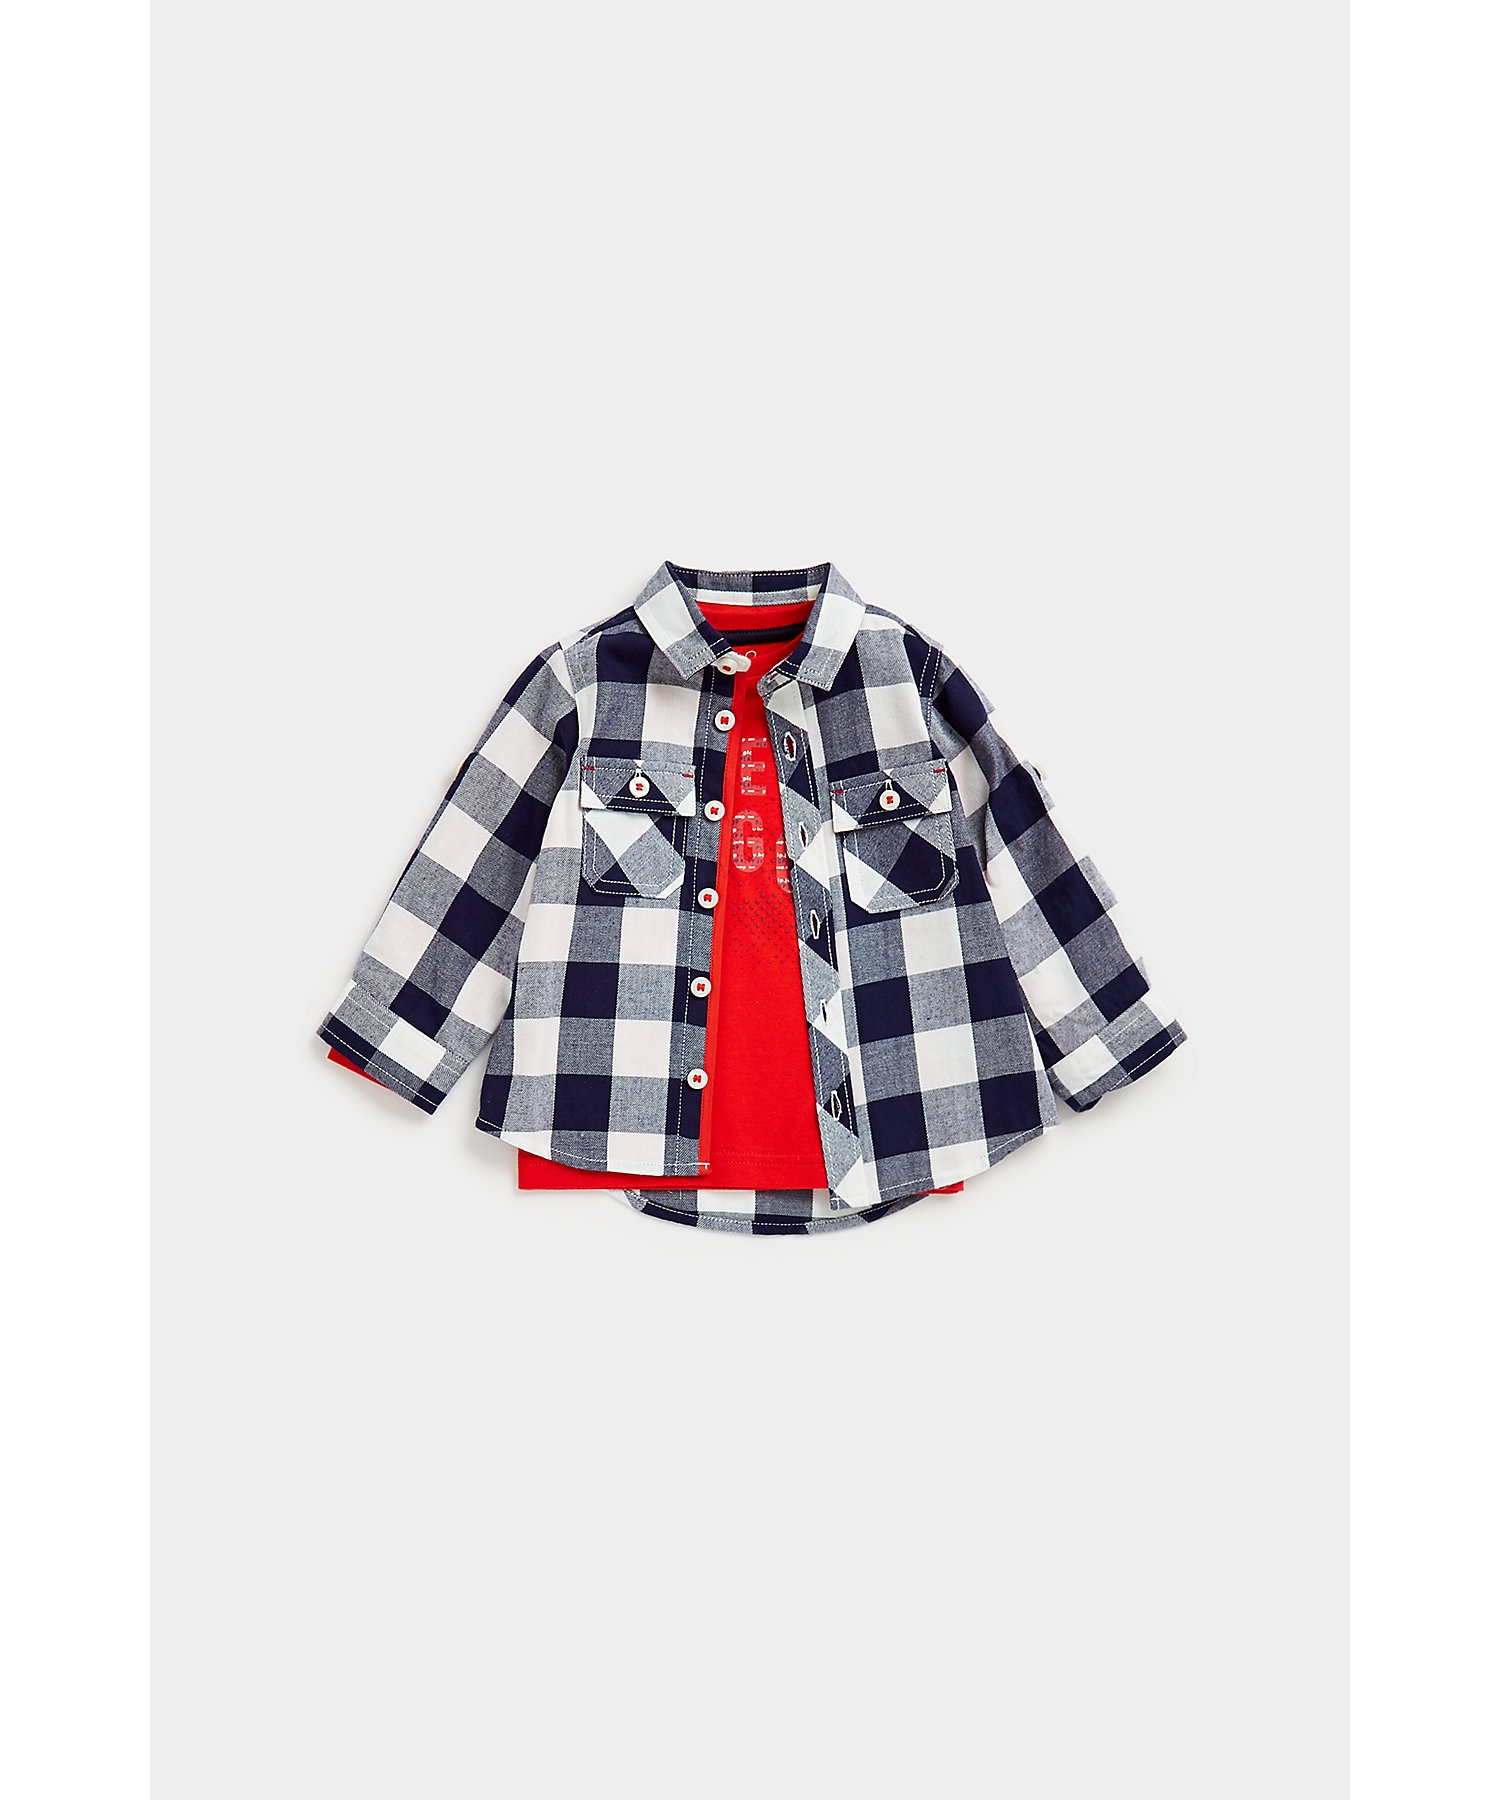 Boys Full Sleeves Shirt Witth T Shirt Checked-Multicolor